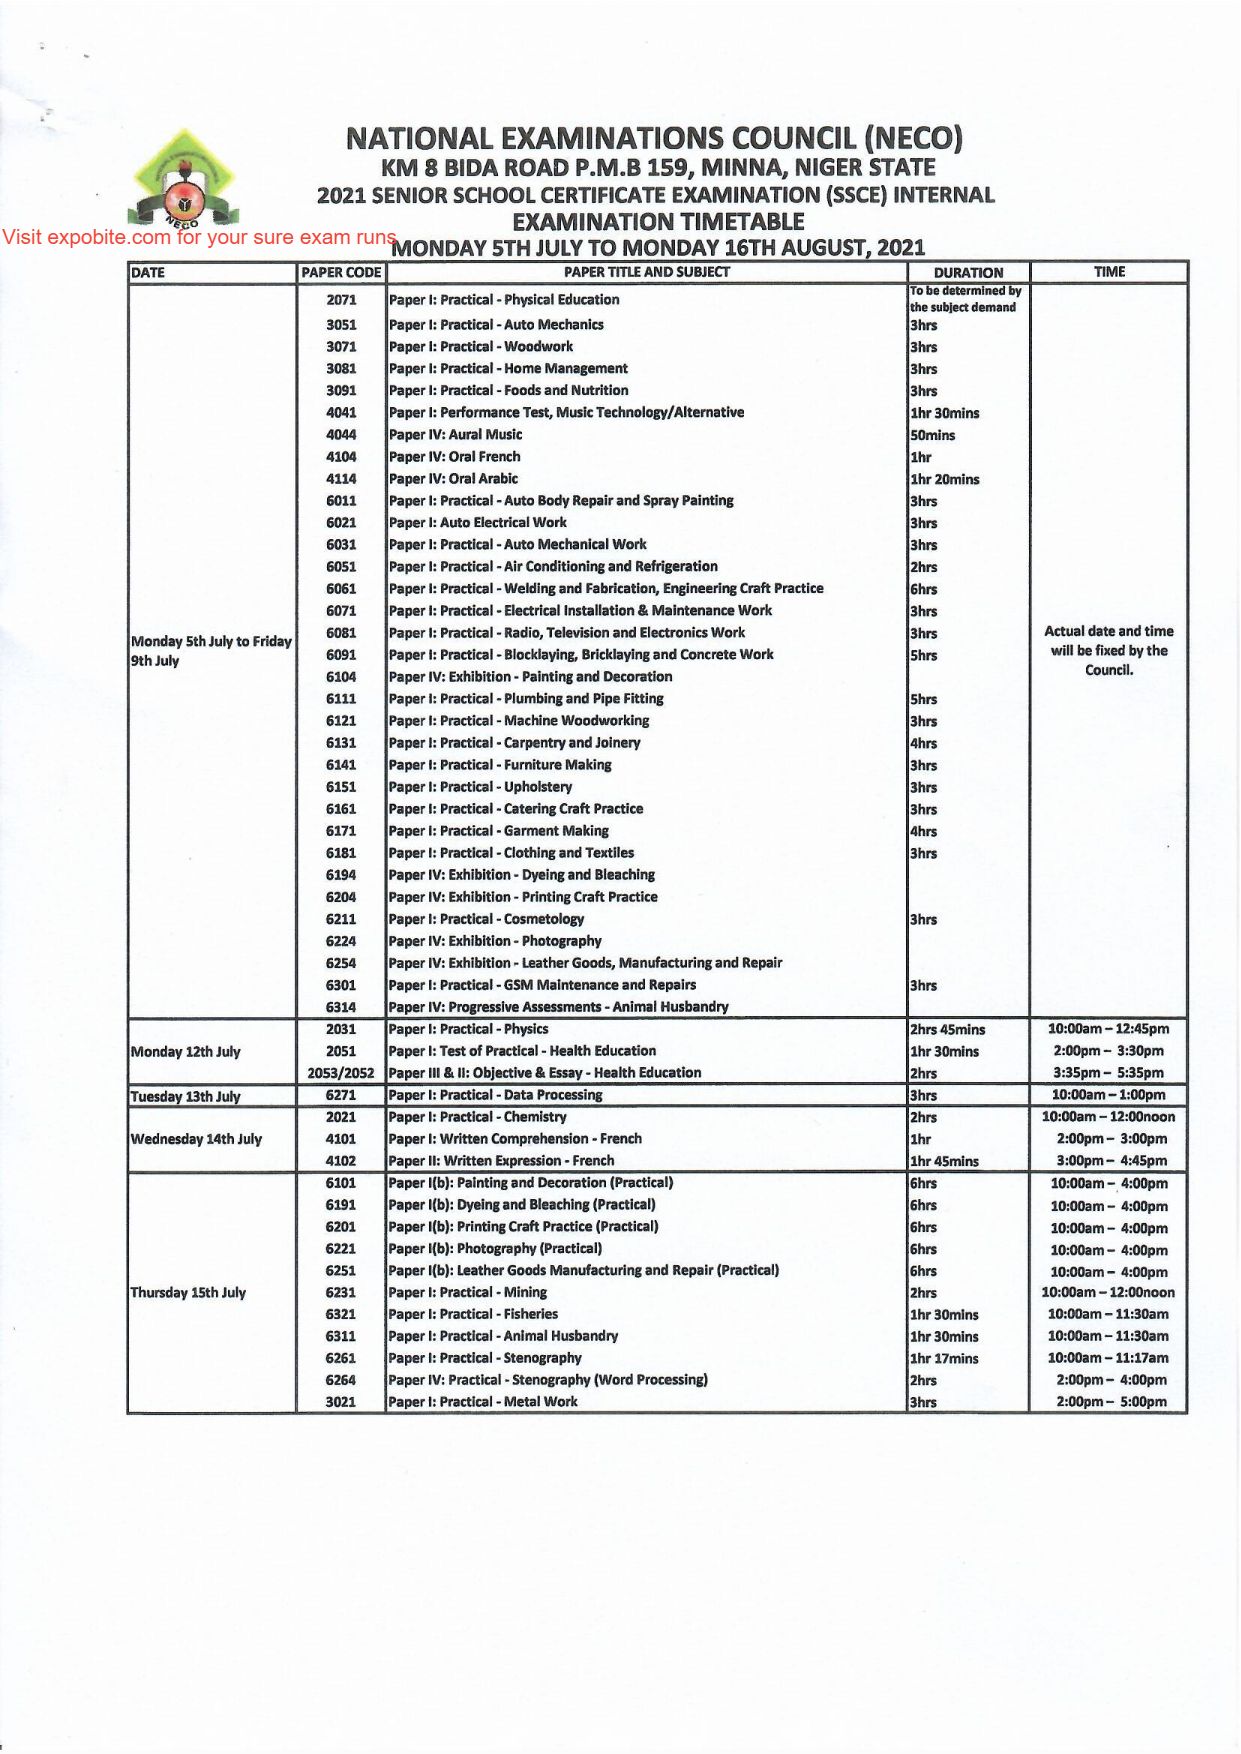 2021-SSCE-INTERNAL-TIMETABLE-SIGNED-min-1 downloaded from expobite_com 